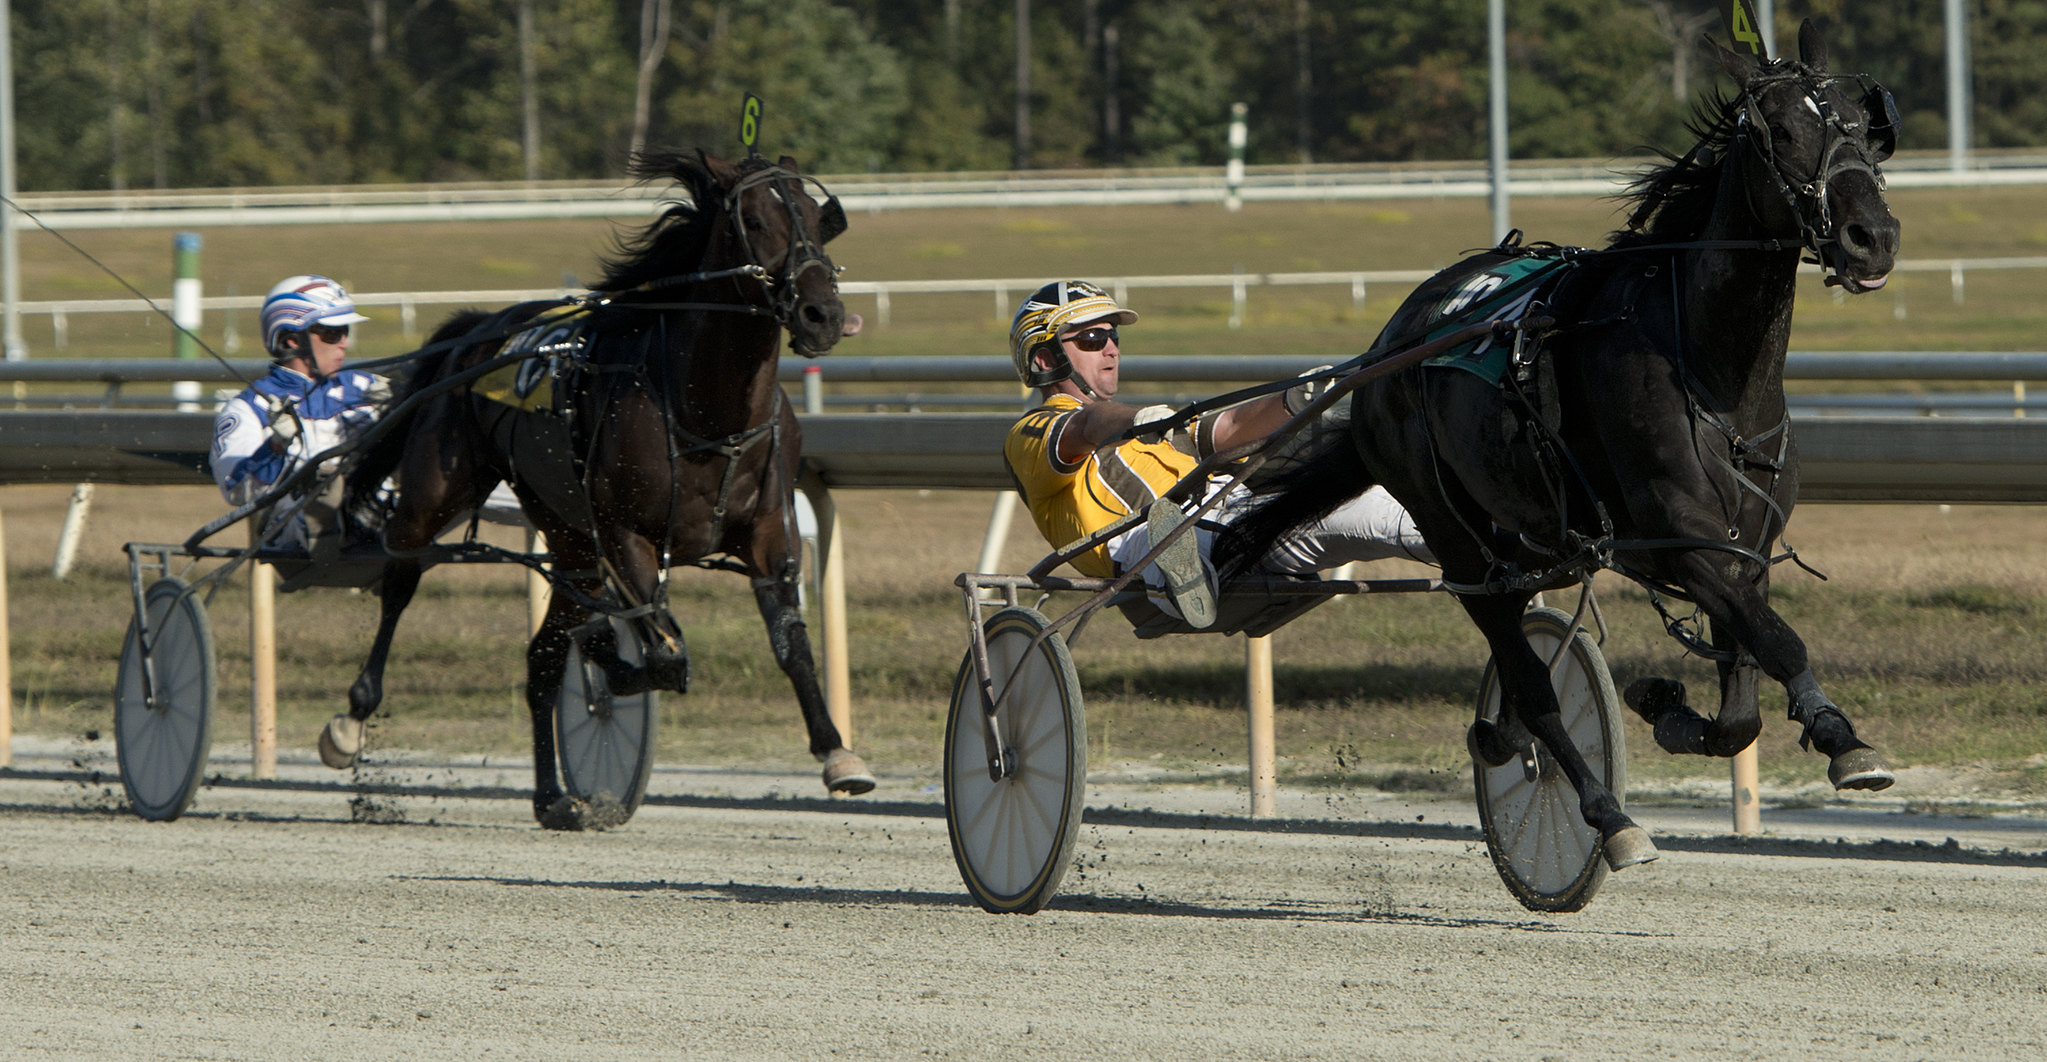 "Harness Racing at Colonial Downs" (CC BY 2.0) by tvnewsbadge